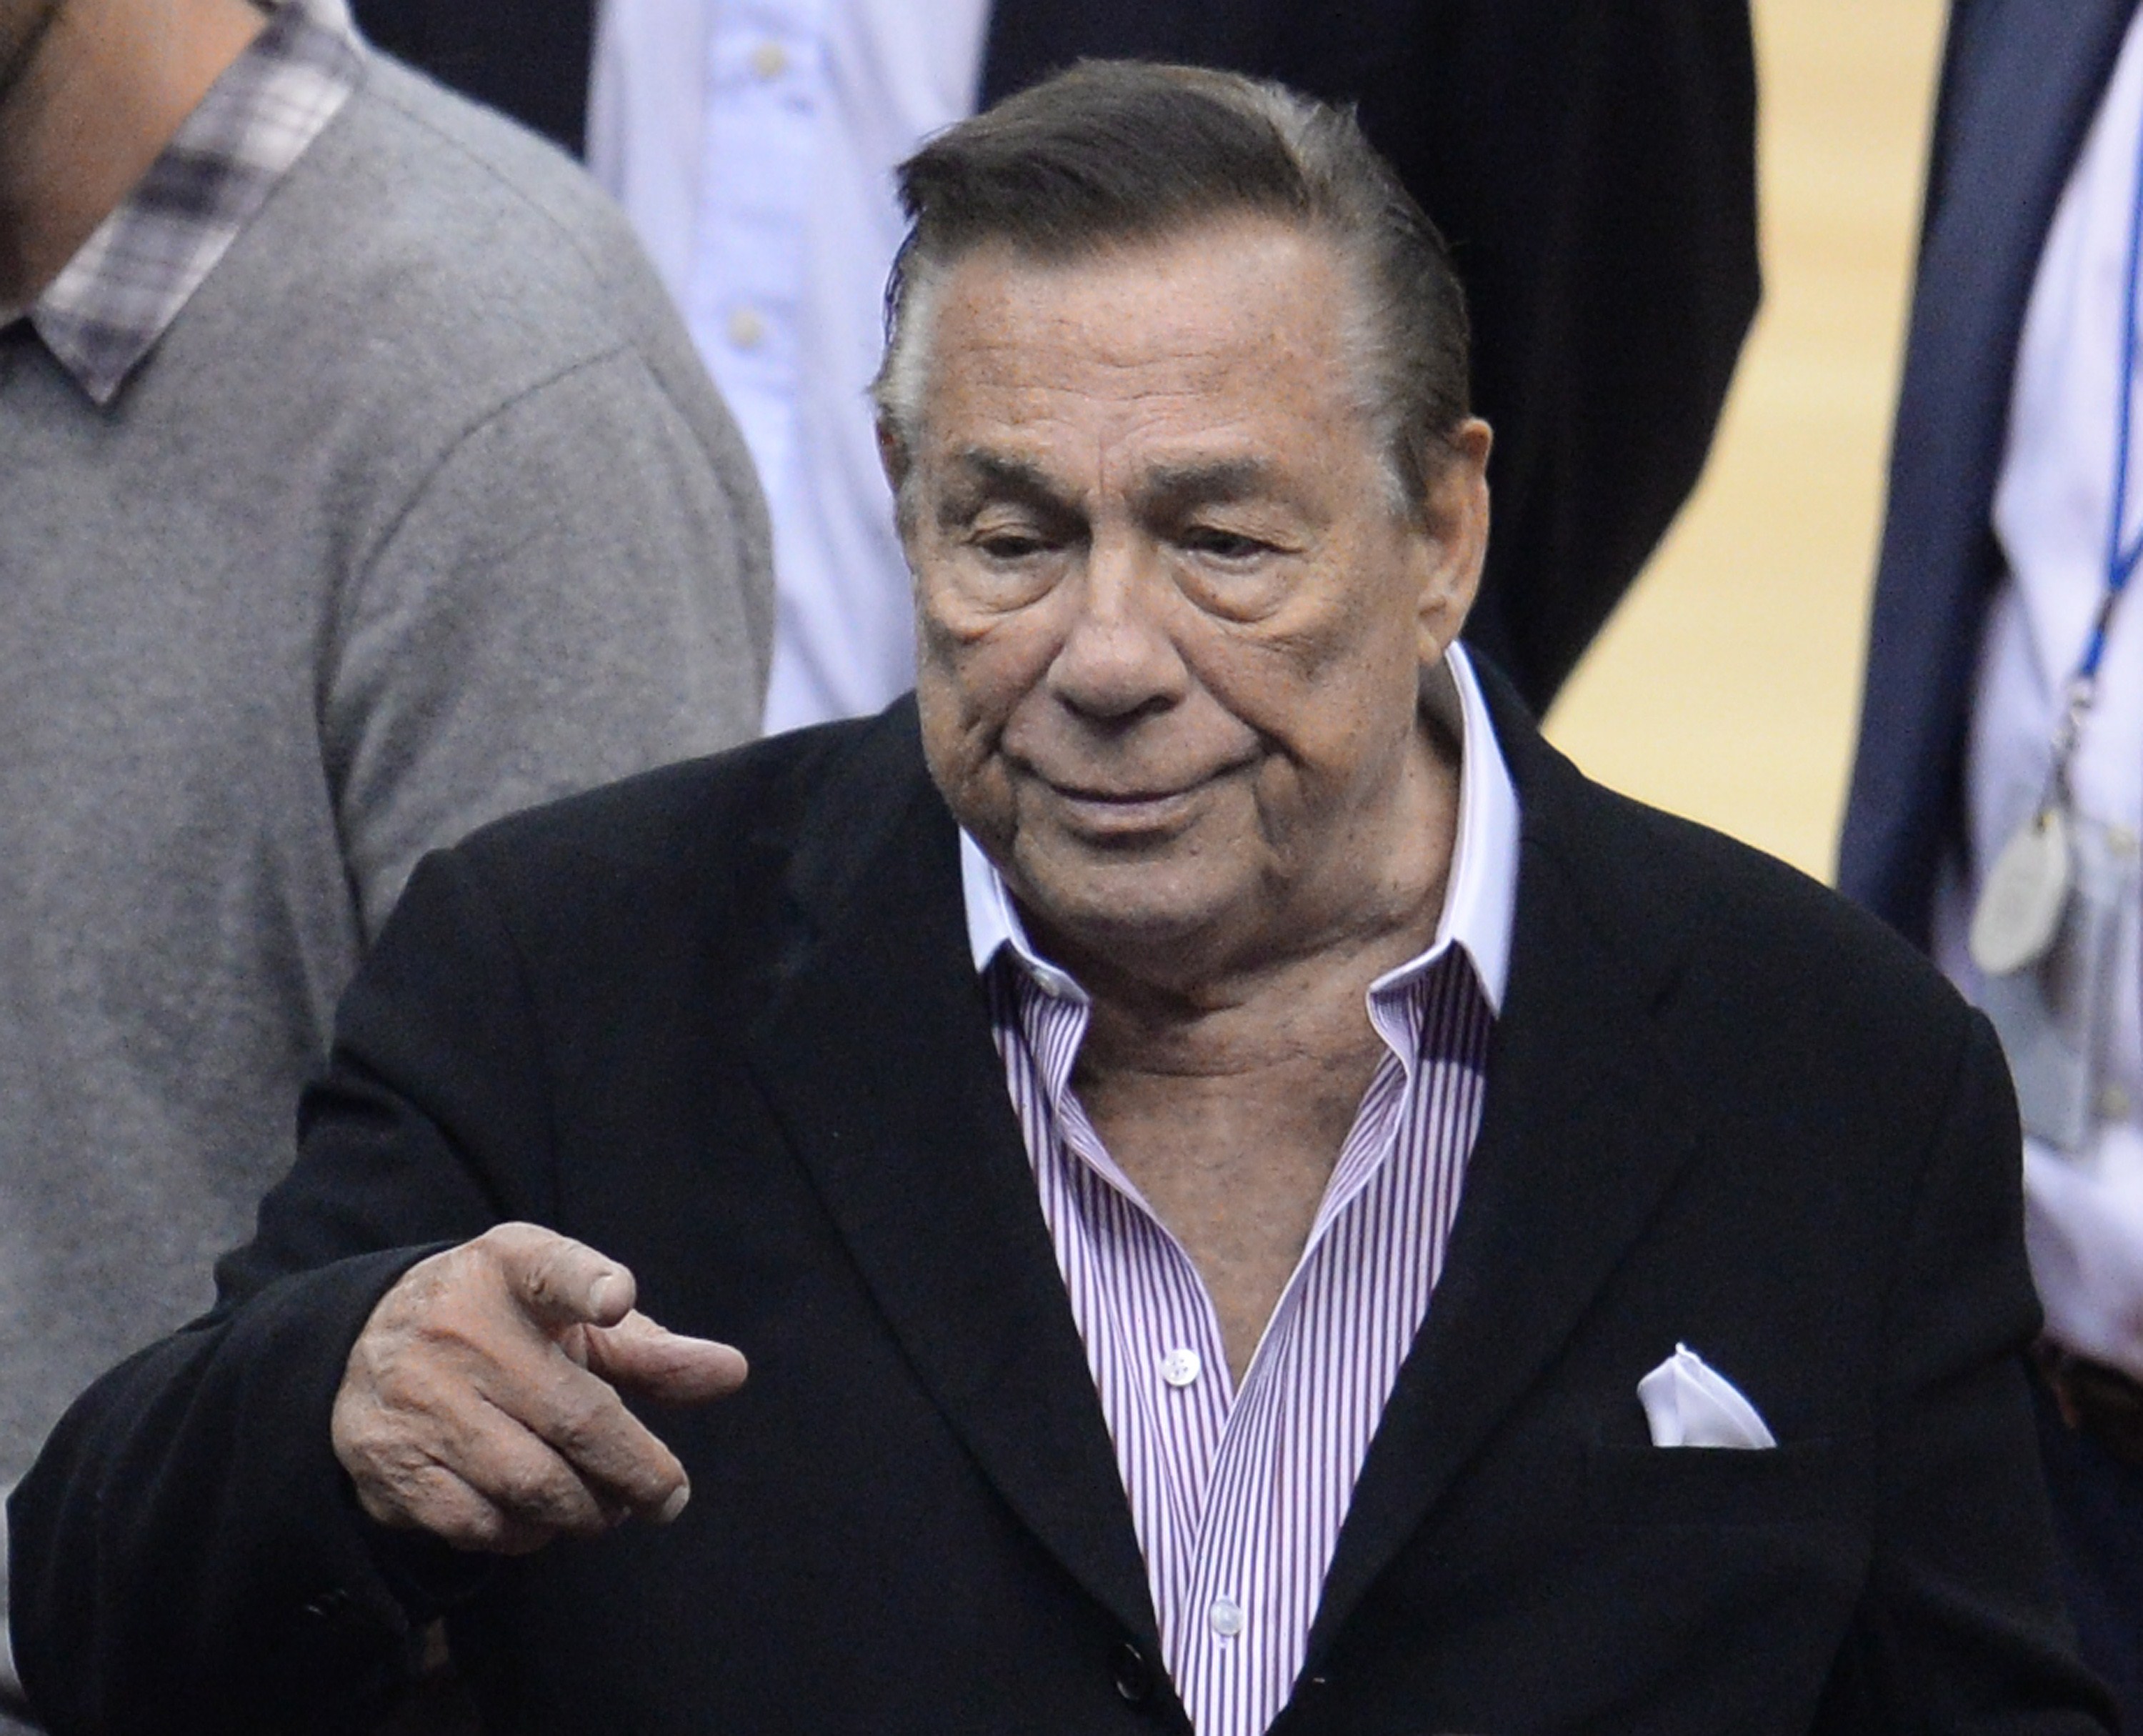 Los Angeles Clippers owner Donald Sterling attends the NBA playoff game between the Clippers and the Golden State Warriors on April 21, 2014 at Staples Center in Los Angeles. (ROBYN BECK—AFP/Getty Images)